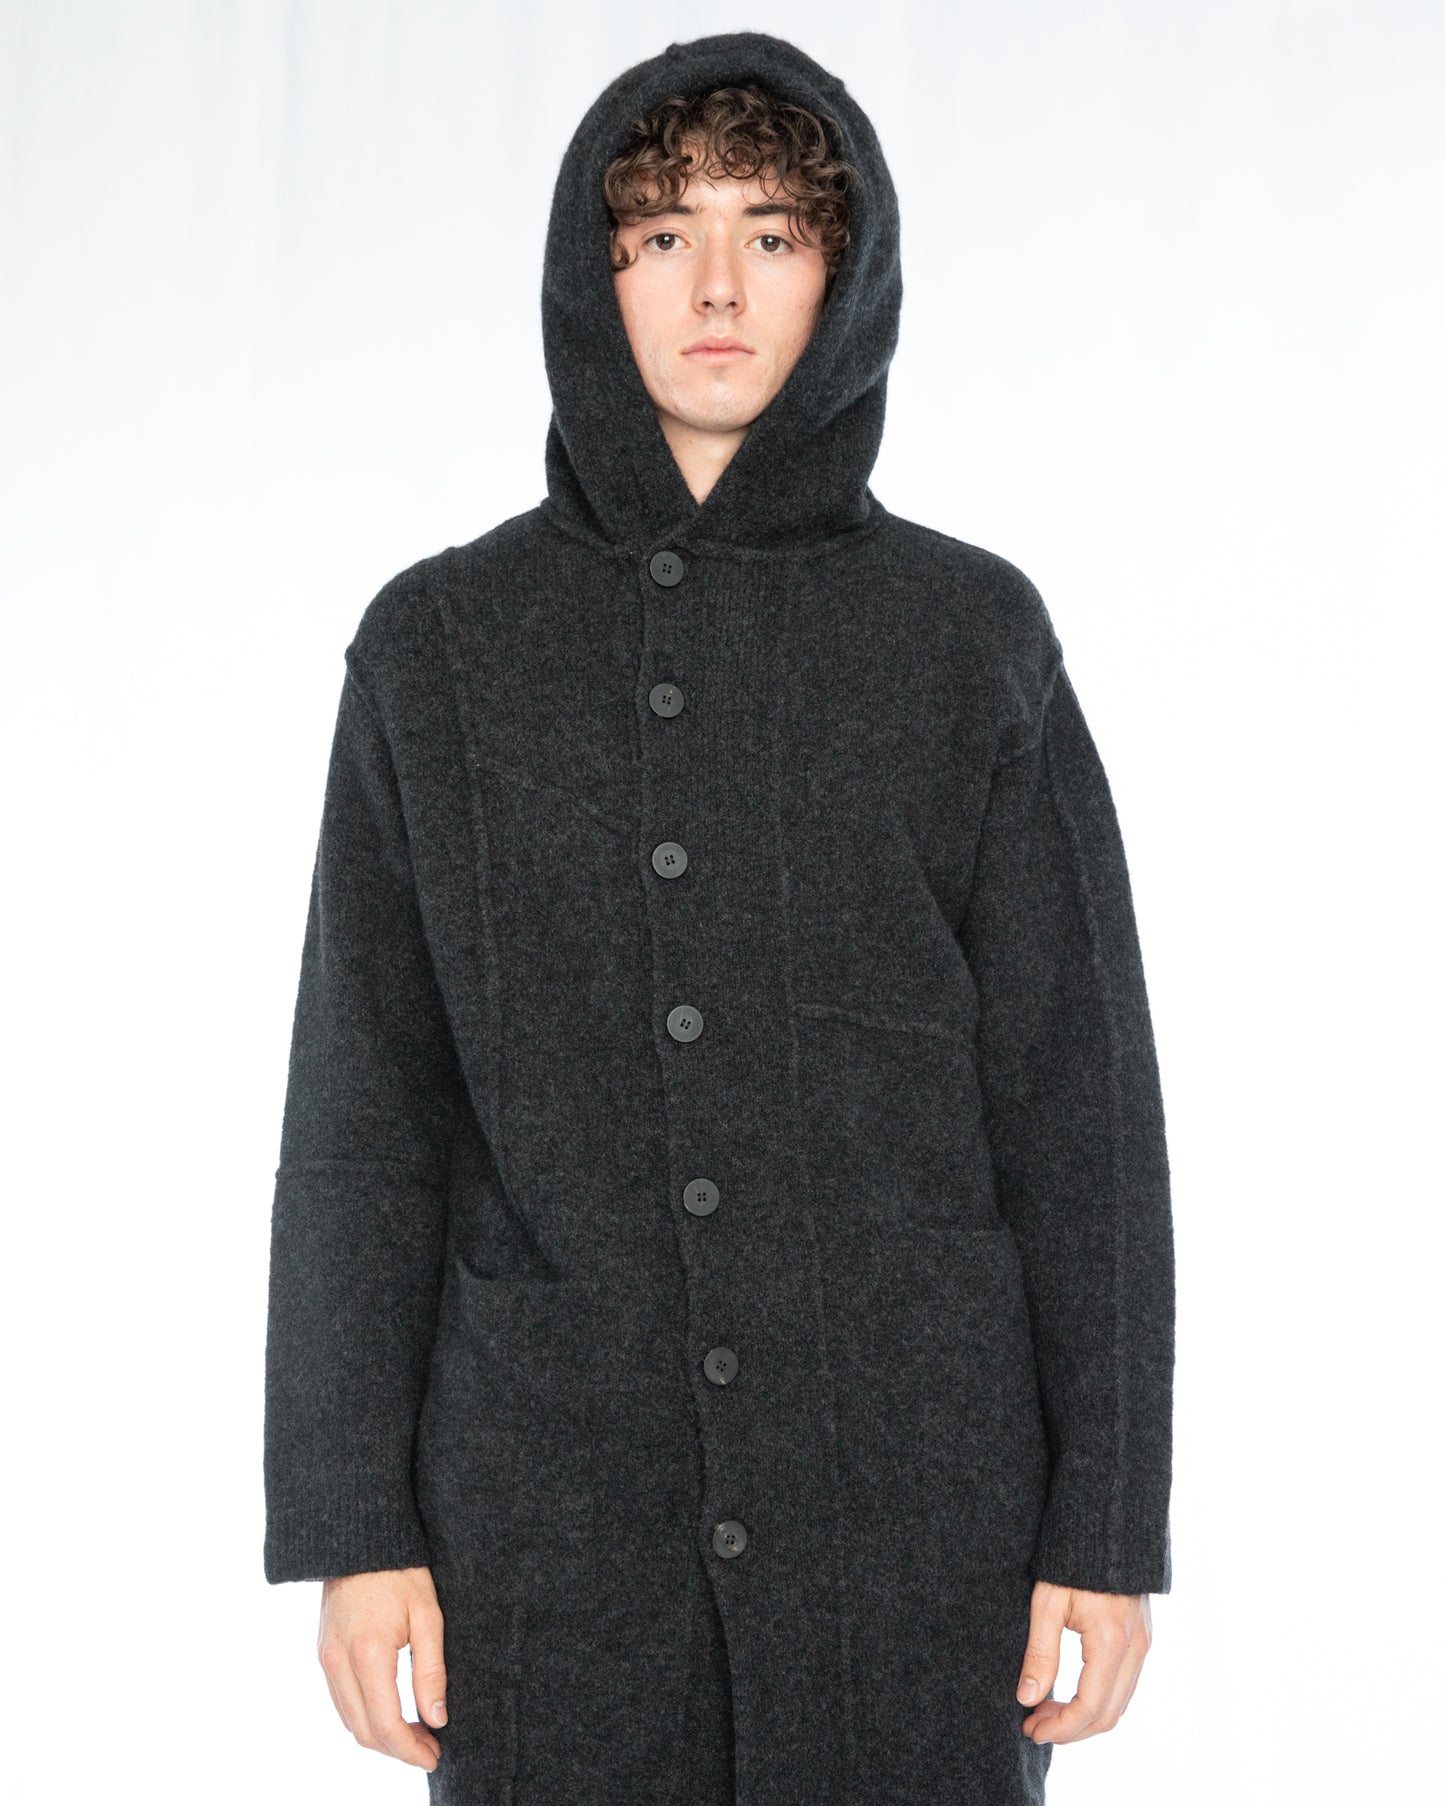 Graphite Patchwork Wool Yak Knit Hooded Coat